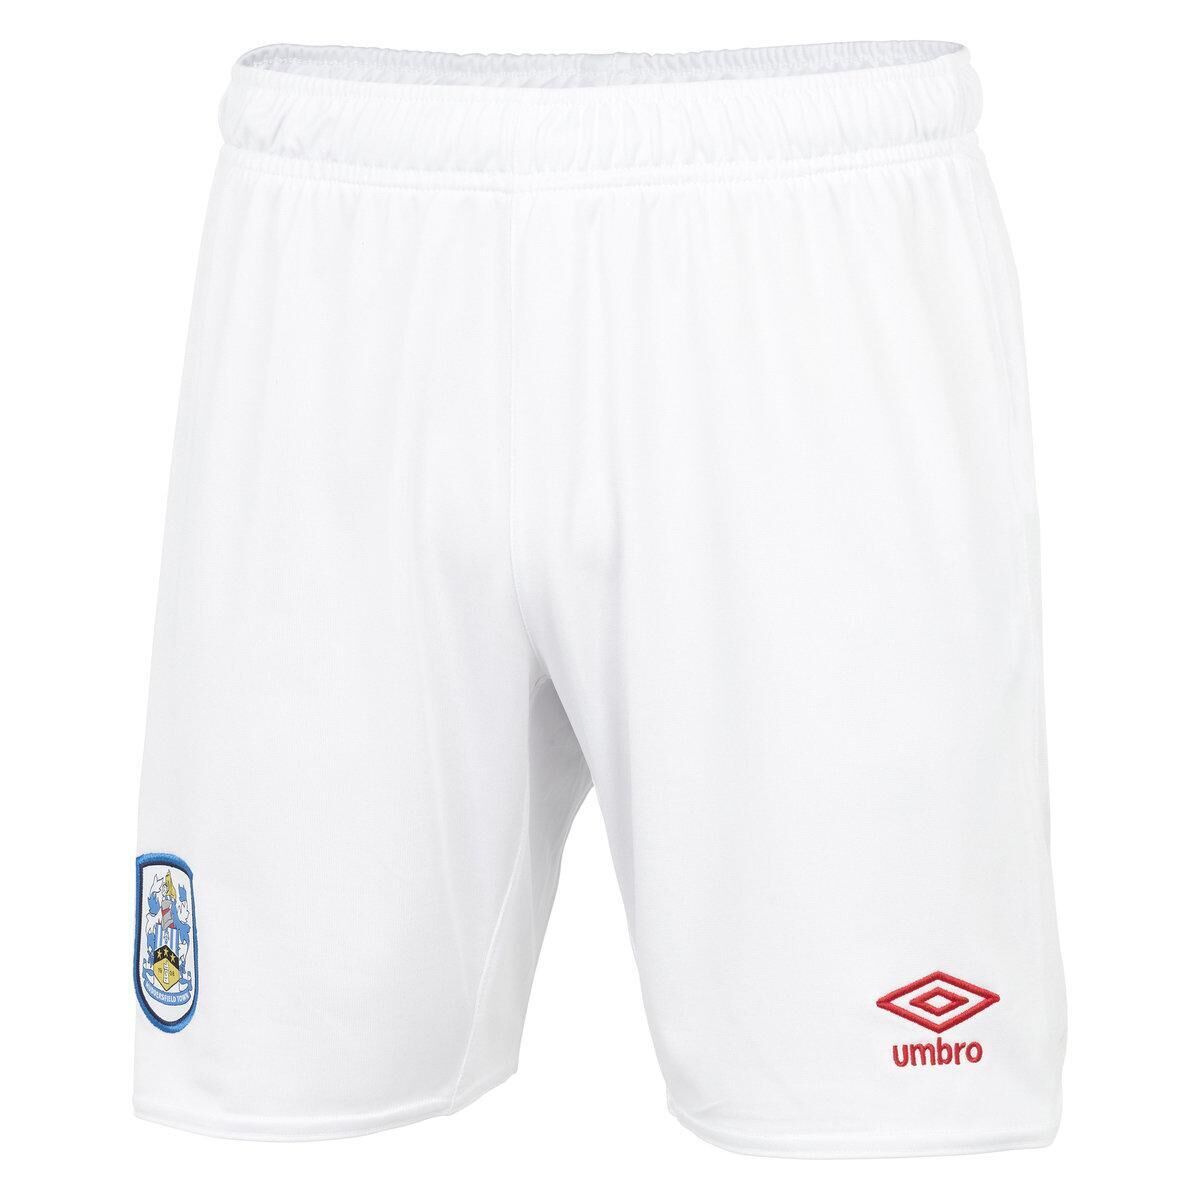 UMBRO Huddersfield Town AFC Mens 20222023 Home Shorts (White)